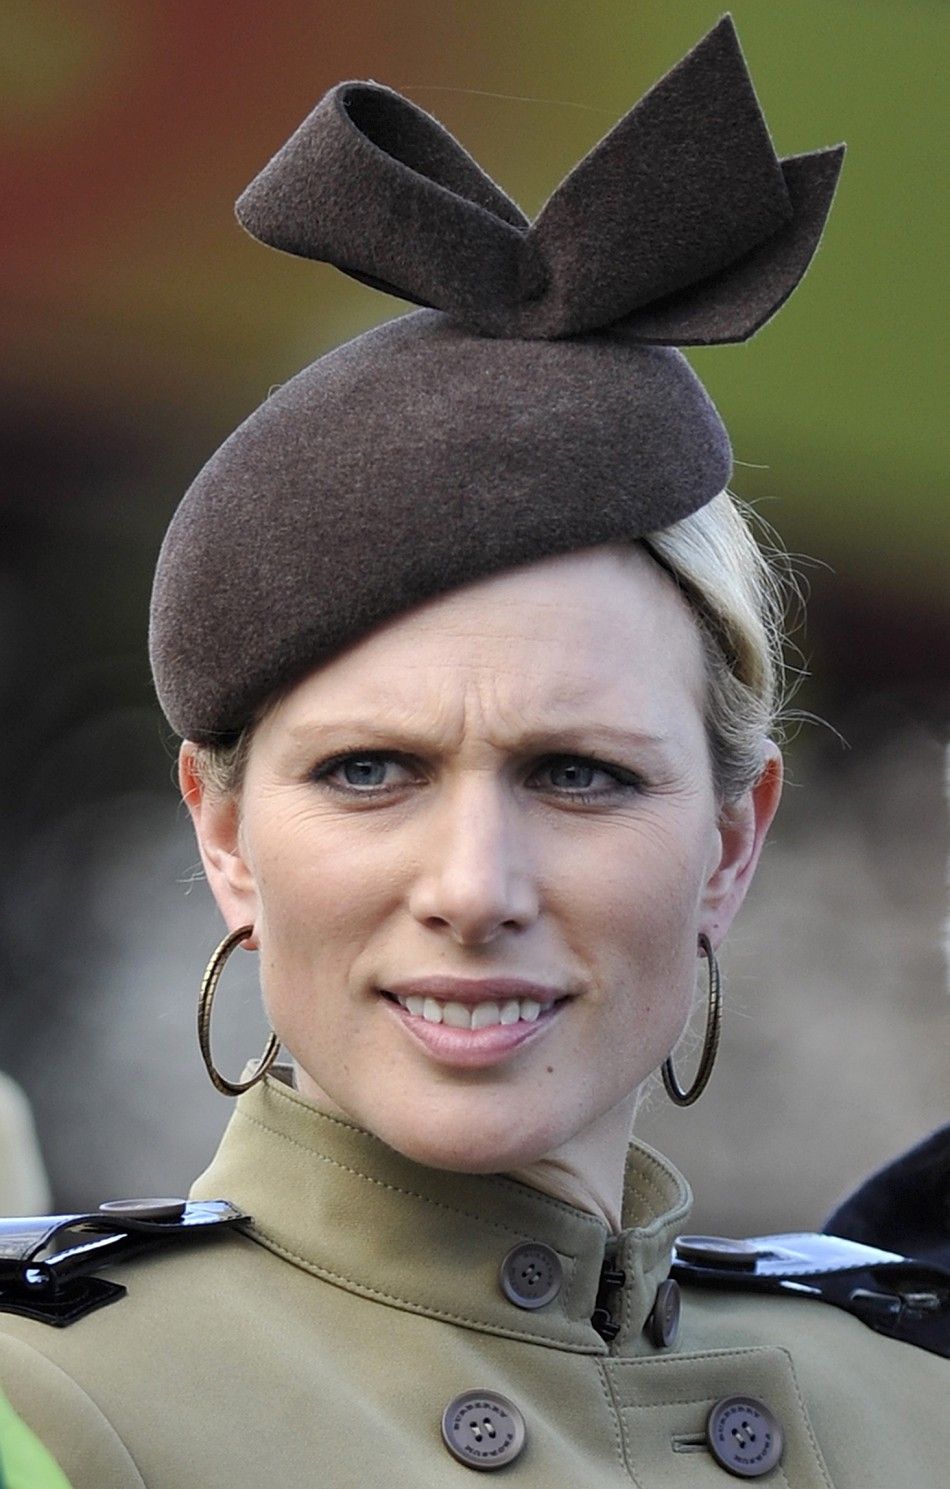 Britains Zara Phillips smiles as she chats with friends in the parade ring after the Gold Cup race at the Cheltenham Festival horse racing meet in England